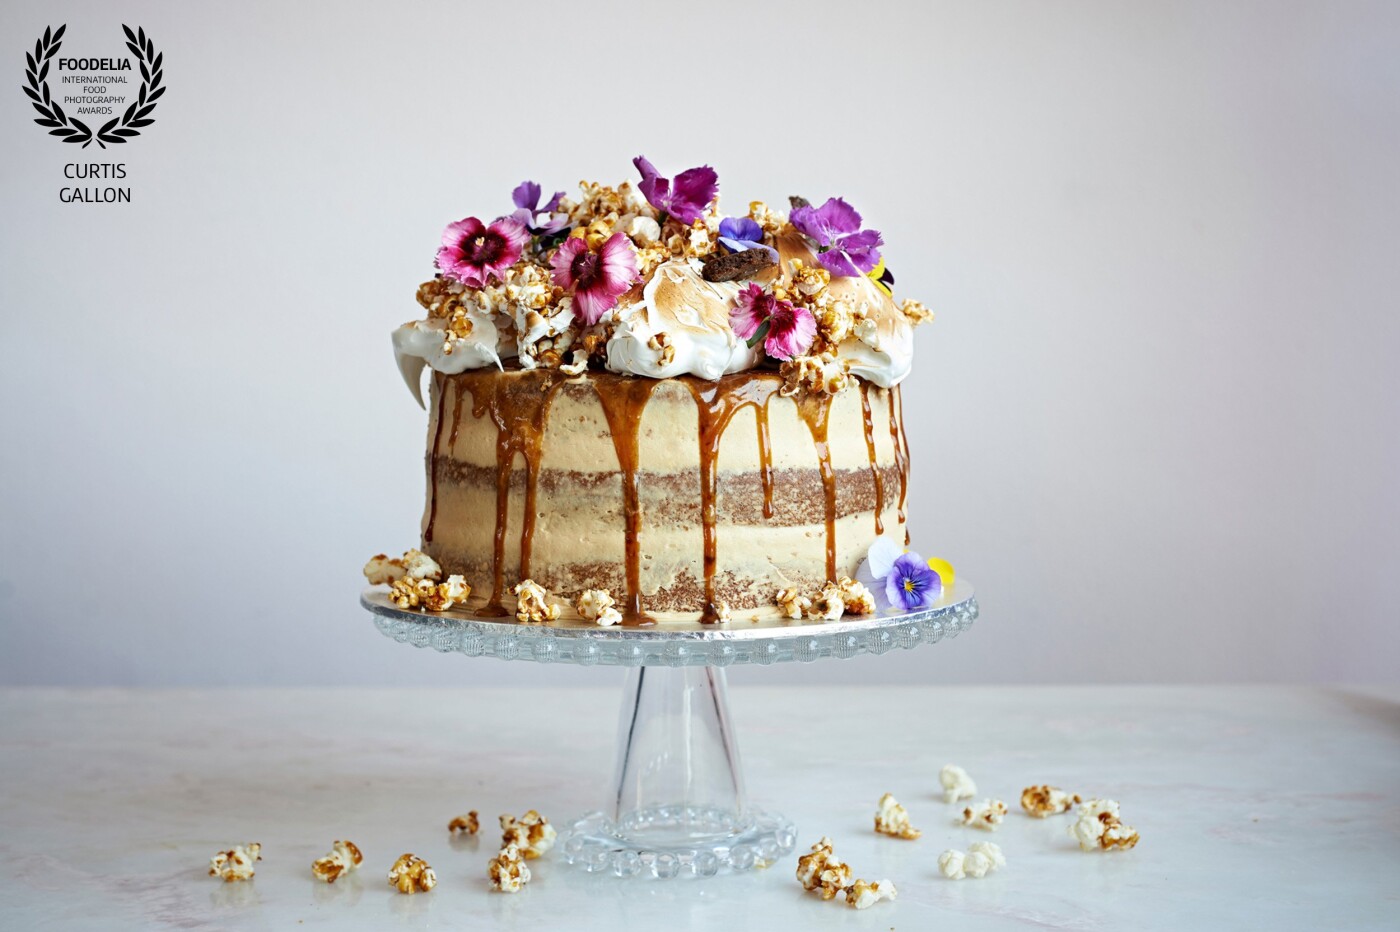 Hummingbird Cake shot for a restaurant in Johannesburg South Africa. This was shot using natural light .<br />
I really love the soft light, however the cake was beautifully decorated.